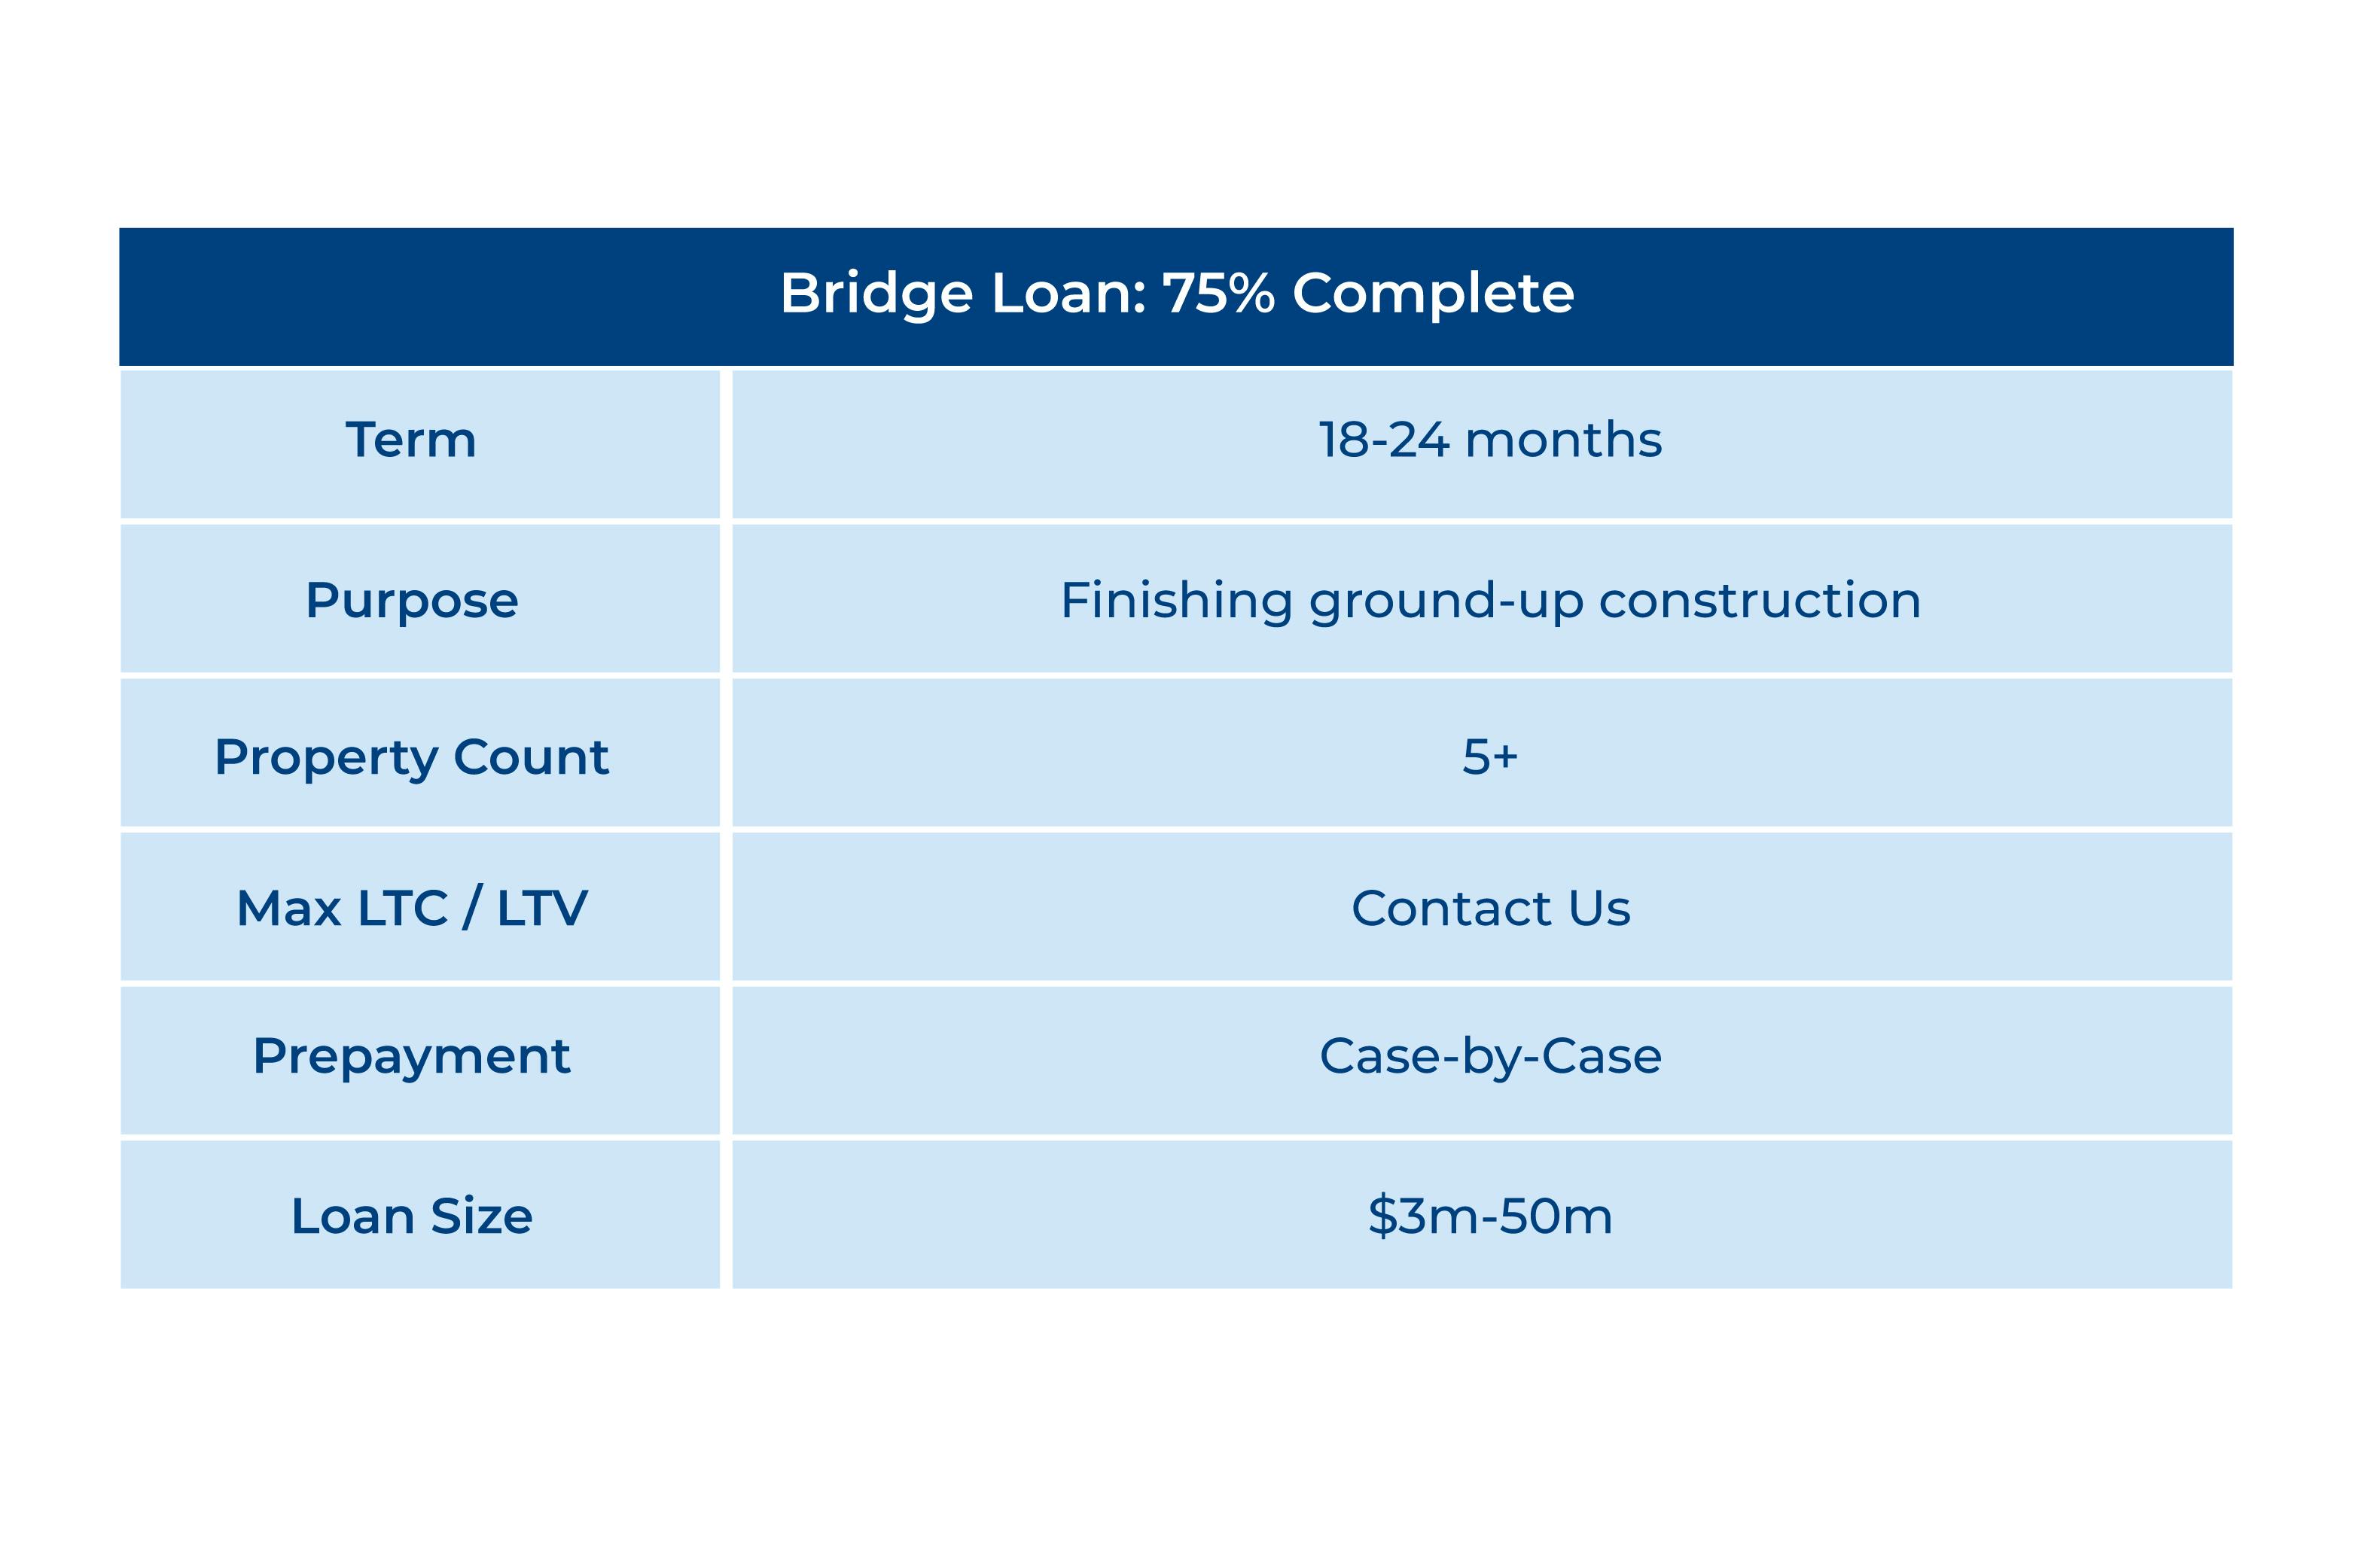 Outlines Avenue One Bridge Loan: 75% complete. Term: 18-24 months, Purpose: finishing ground up construction, Property count 5+, Max TC/LTV: Contact Us, Prepayment case-by-case, Loan Size $3m-50m